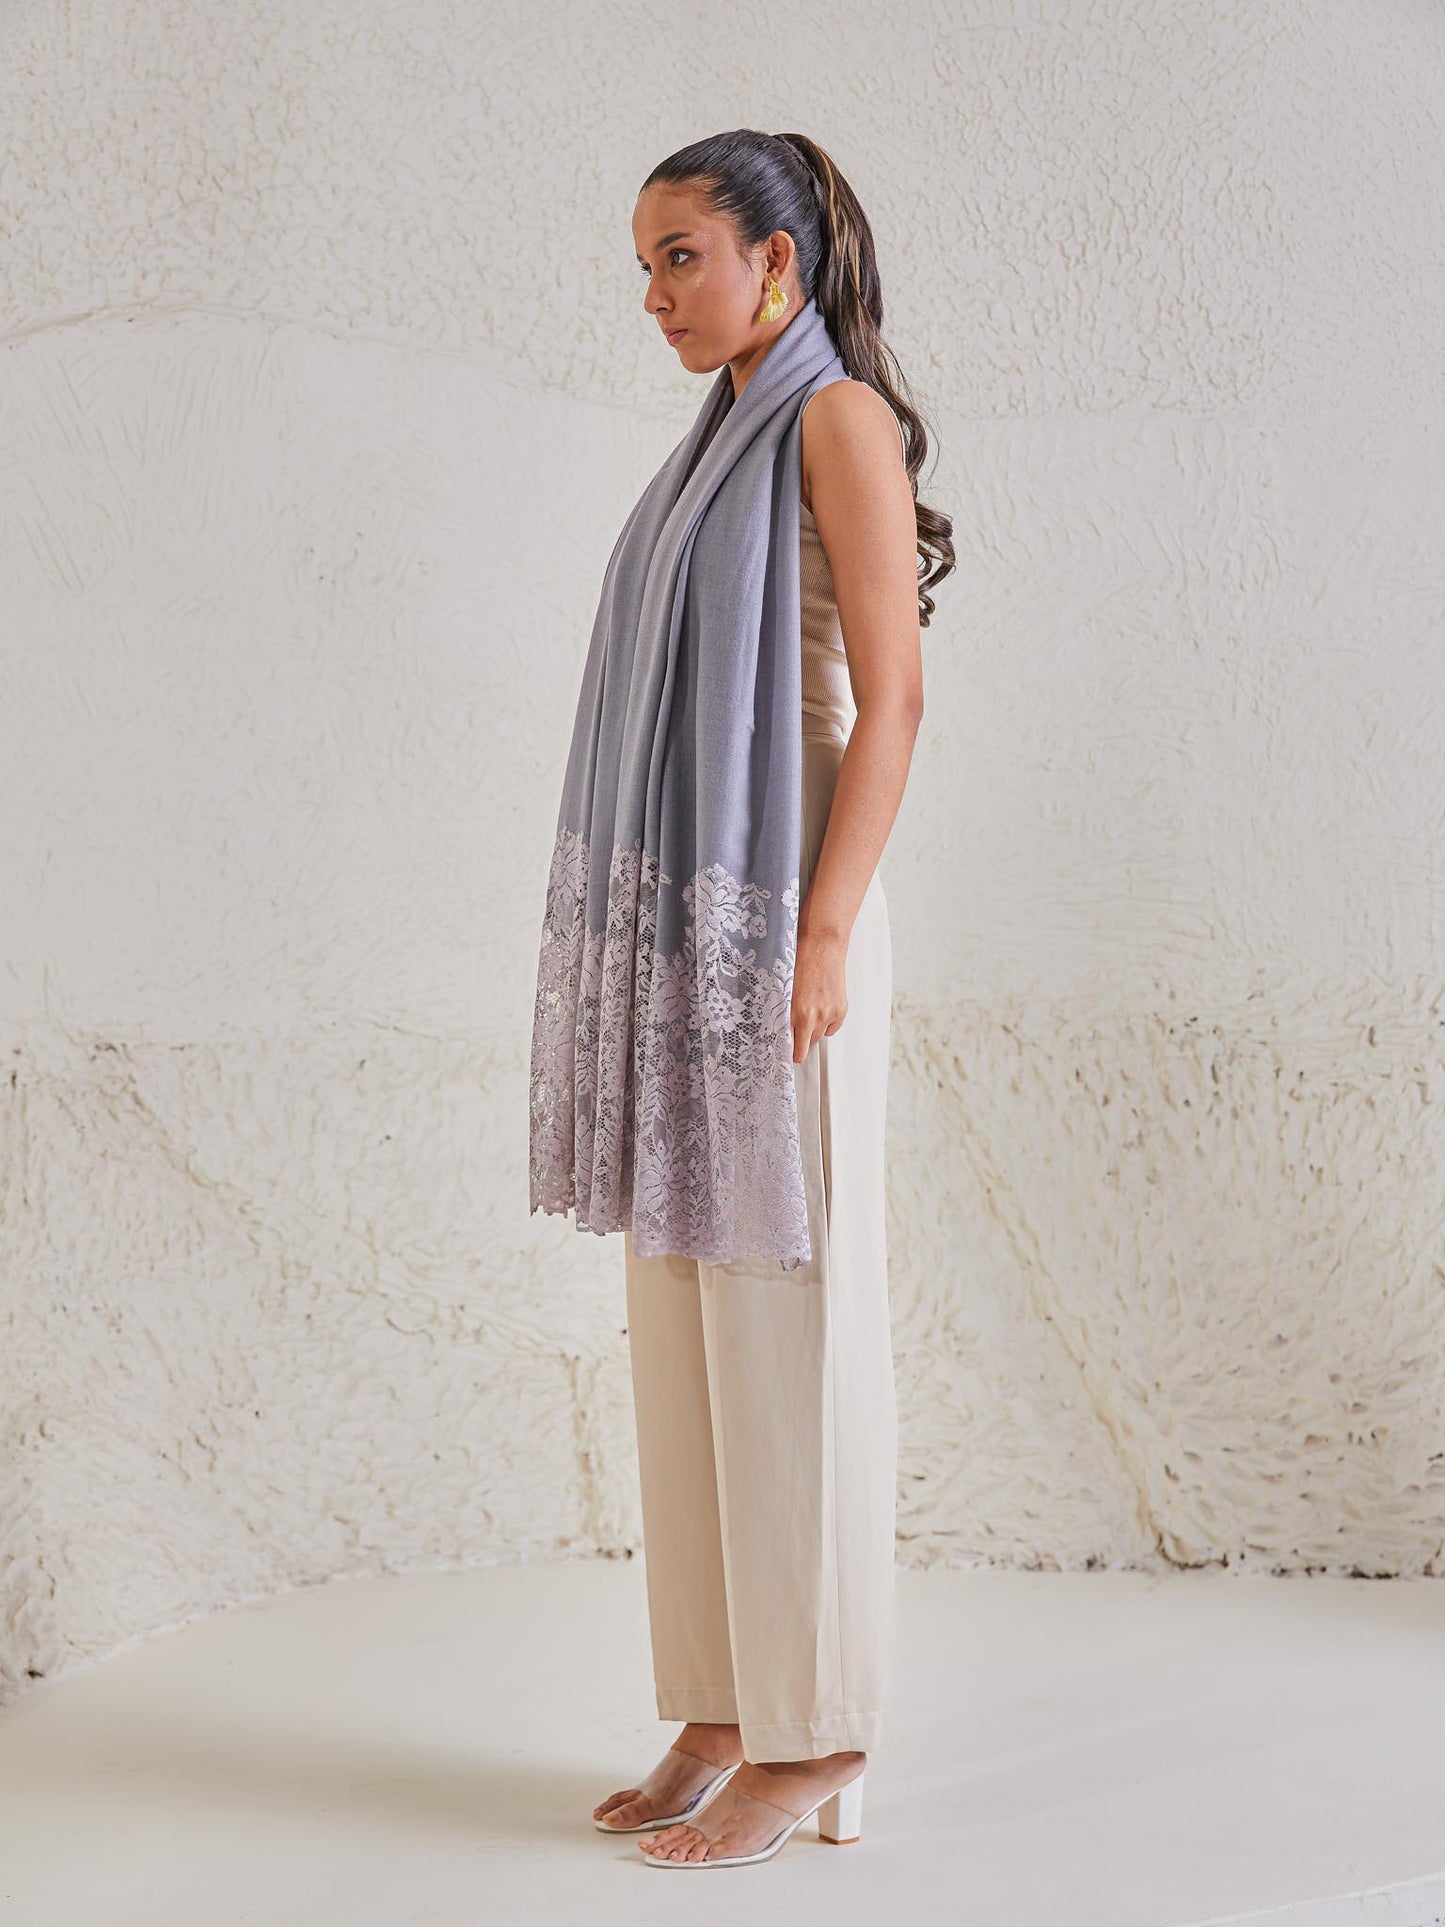 Model is wearing the Celestial Chantilly Pashmina Shawl in powder purple. 